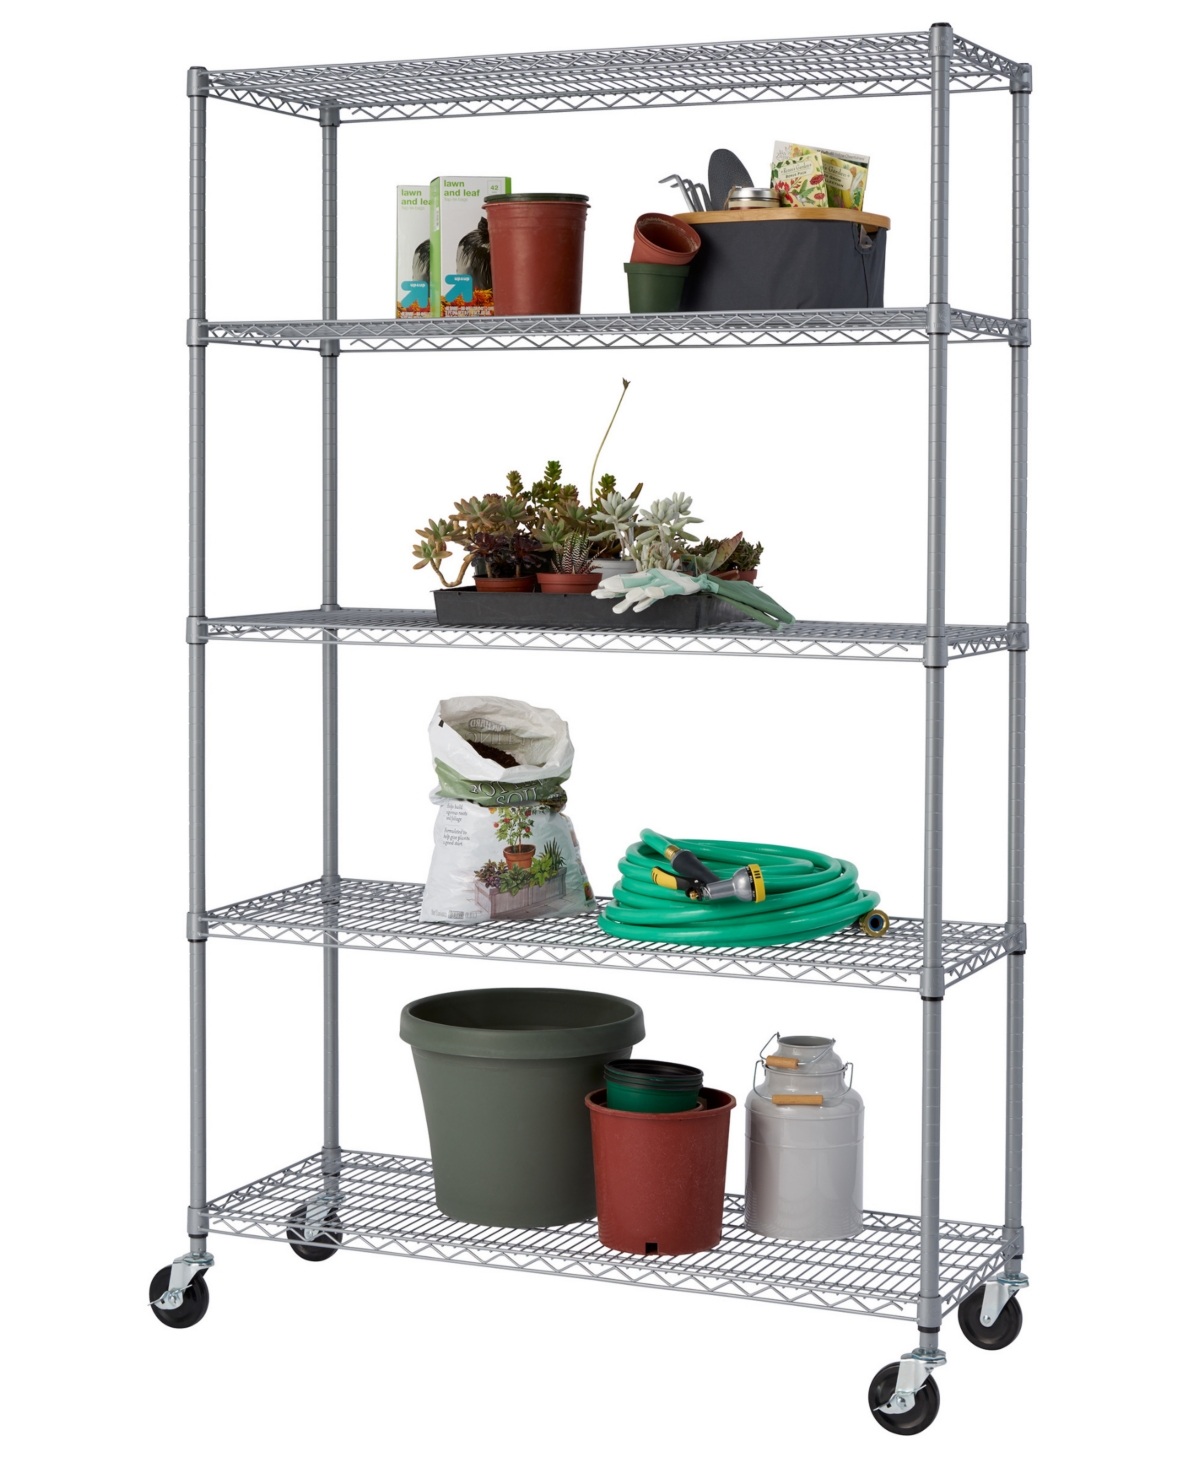 5-Tier Outdoor Wire Shelving Rack with Nsf Includes Wheels - Gray